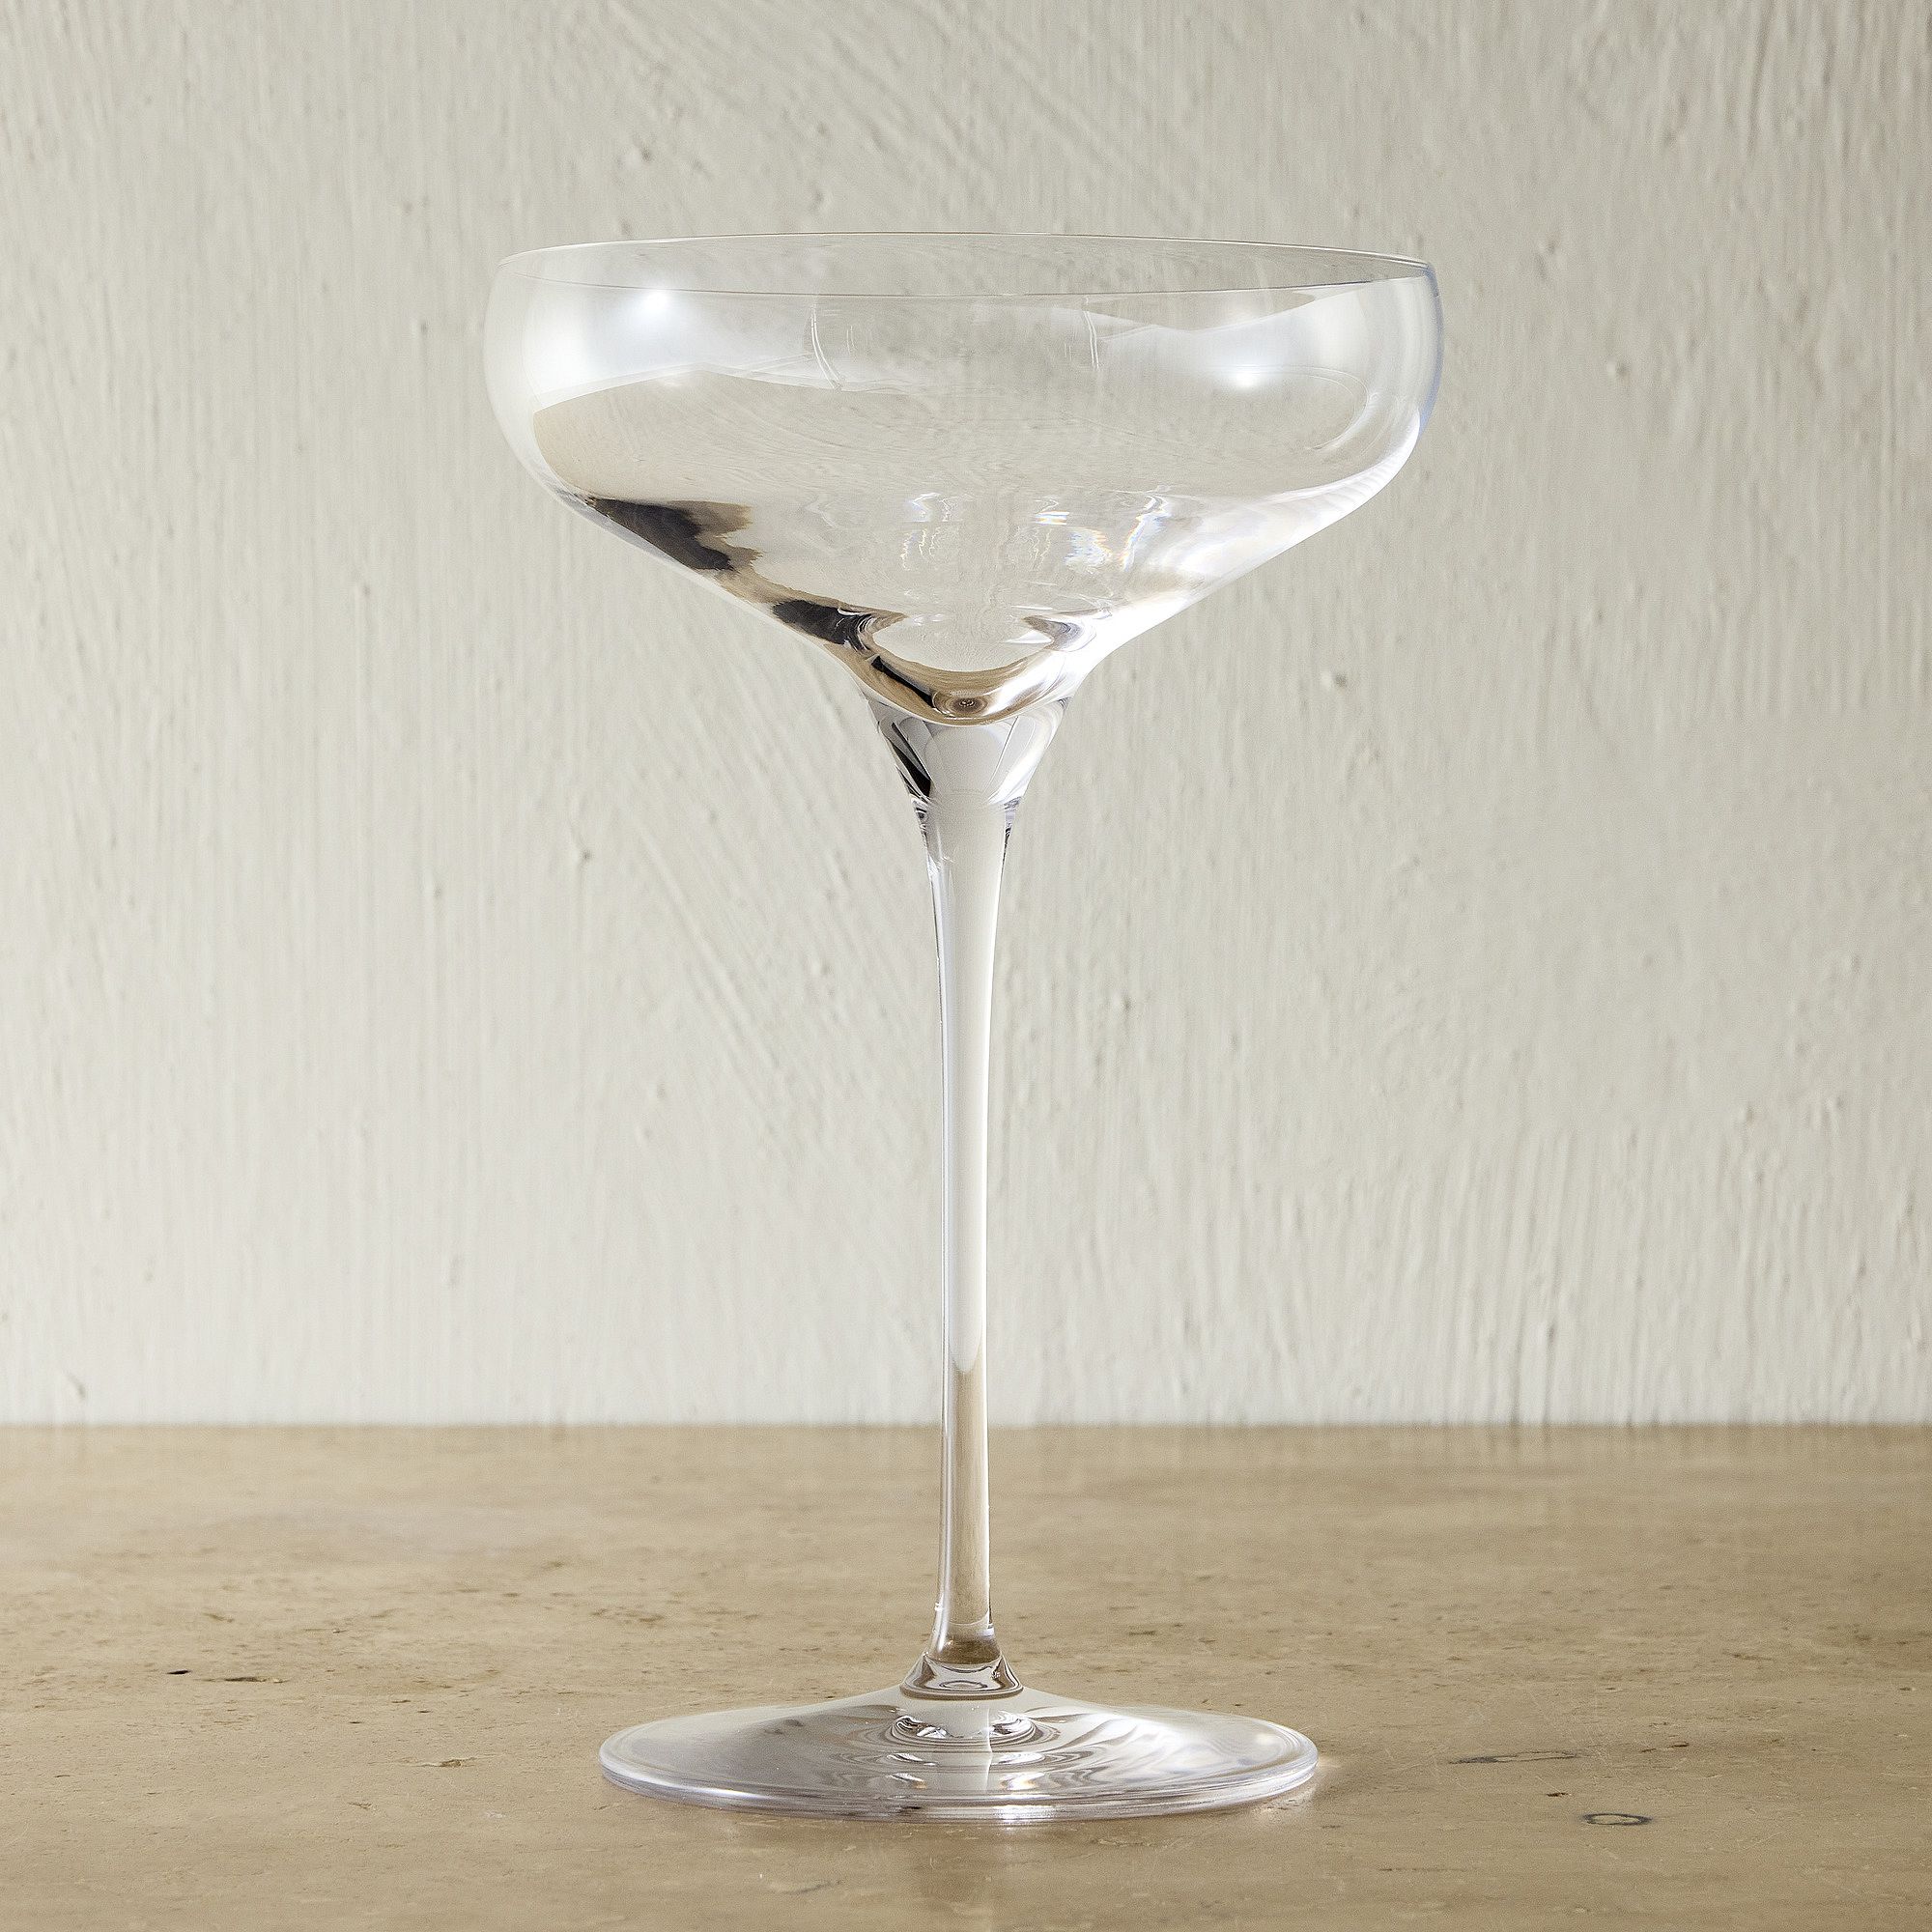 Starlight Lead-Free Crystal Coupe Glass Sets | West Elm